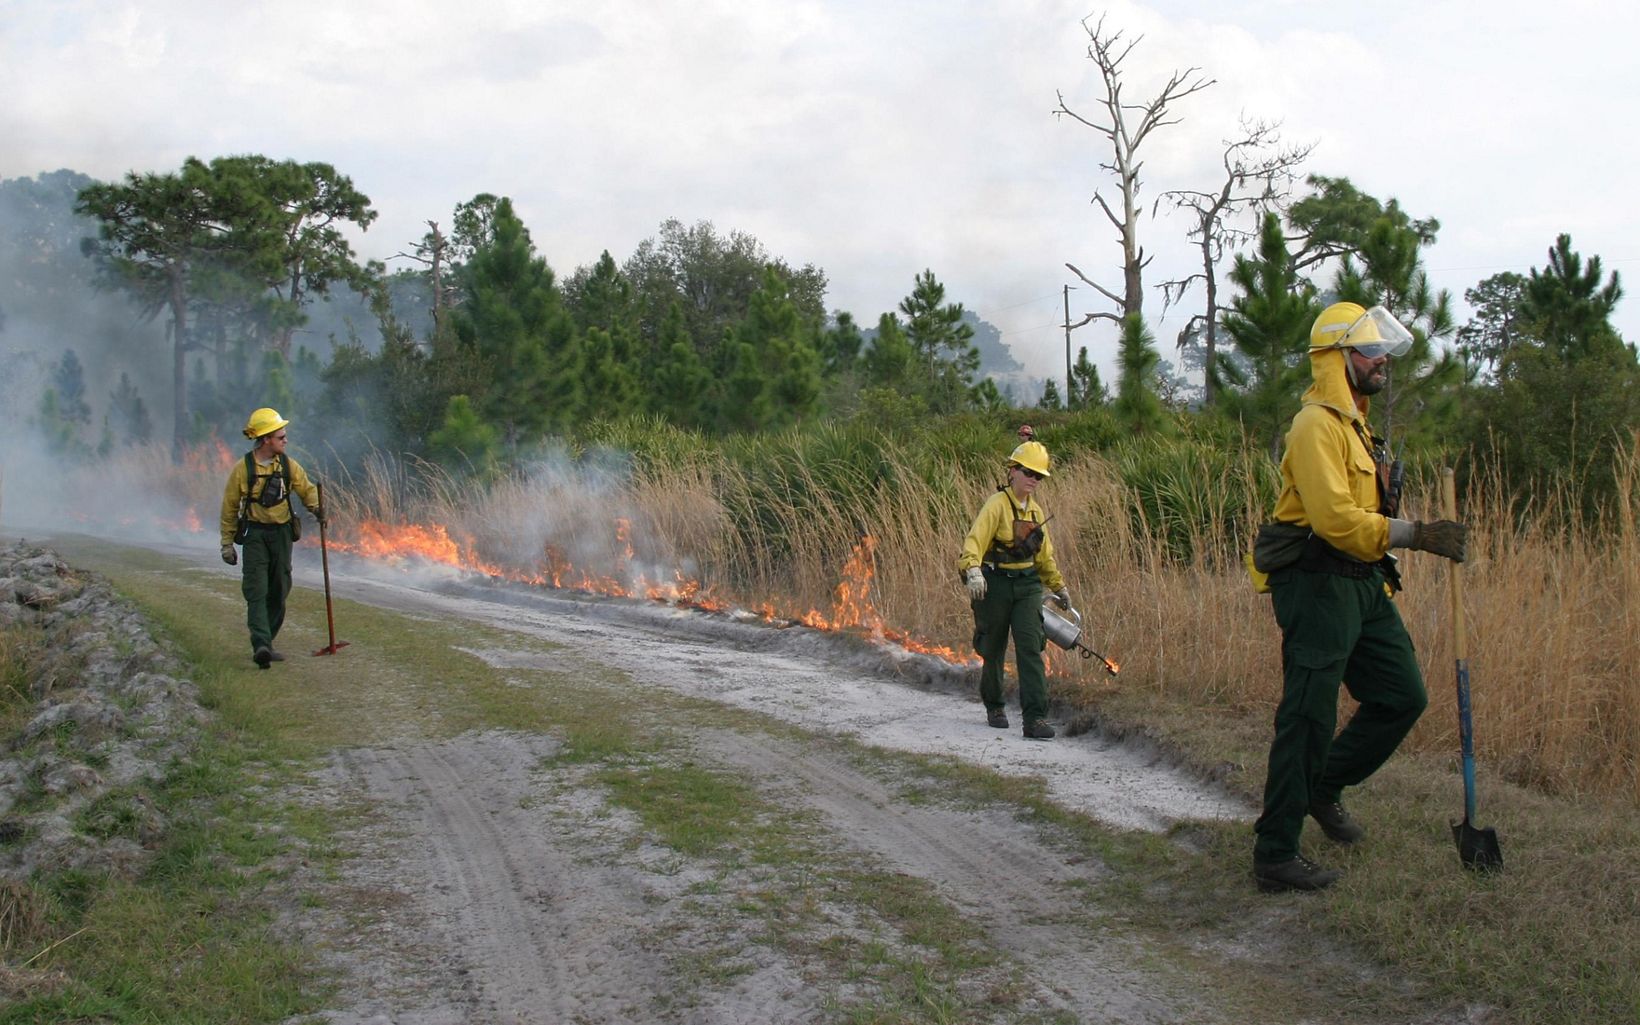 
                
                  On the Front Lines The Burn Crew monitors the fire ensuring safety first.  
                  © Eric Blackmore
                
              